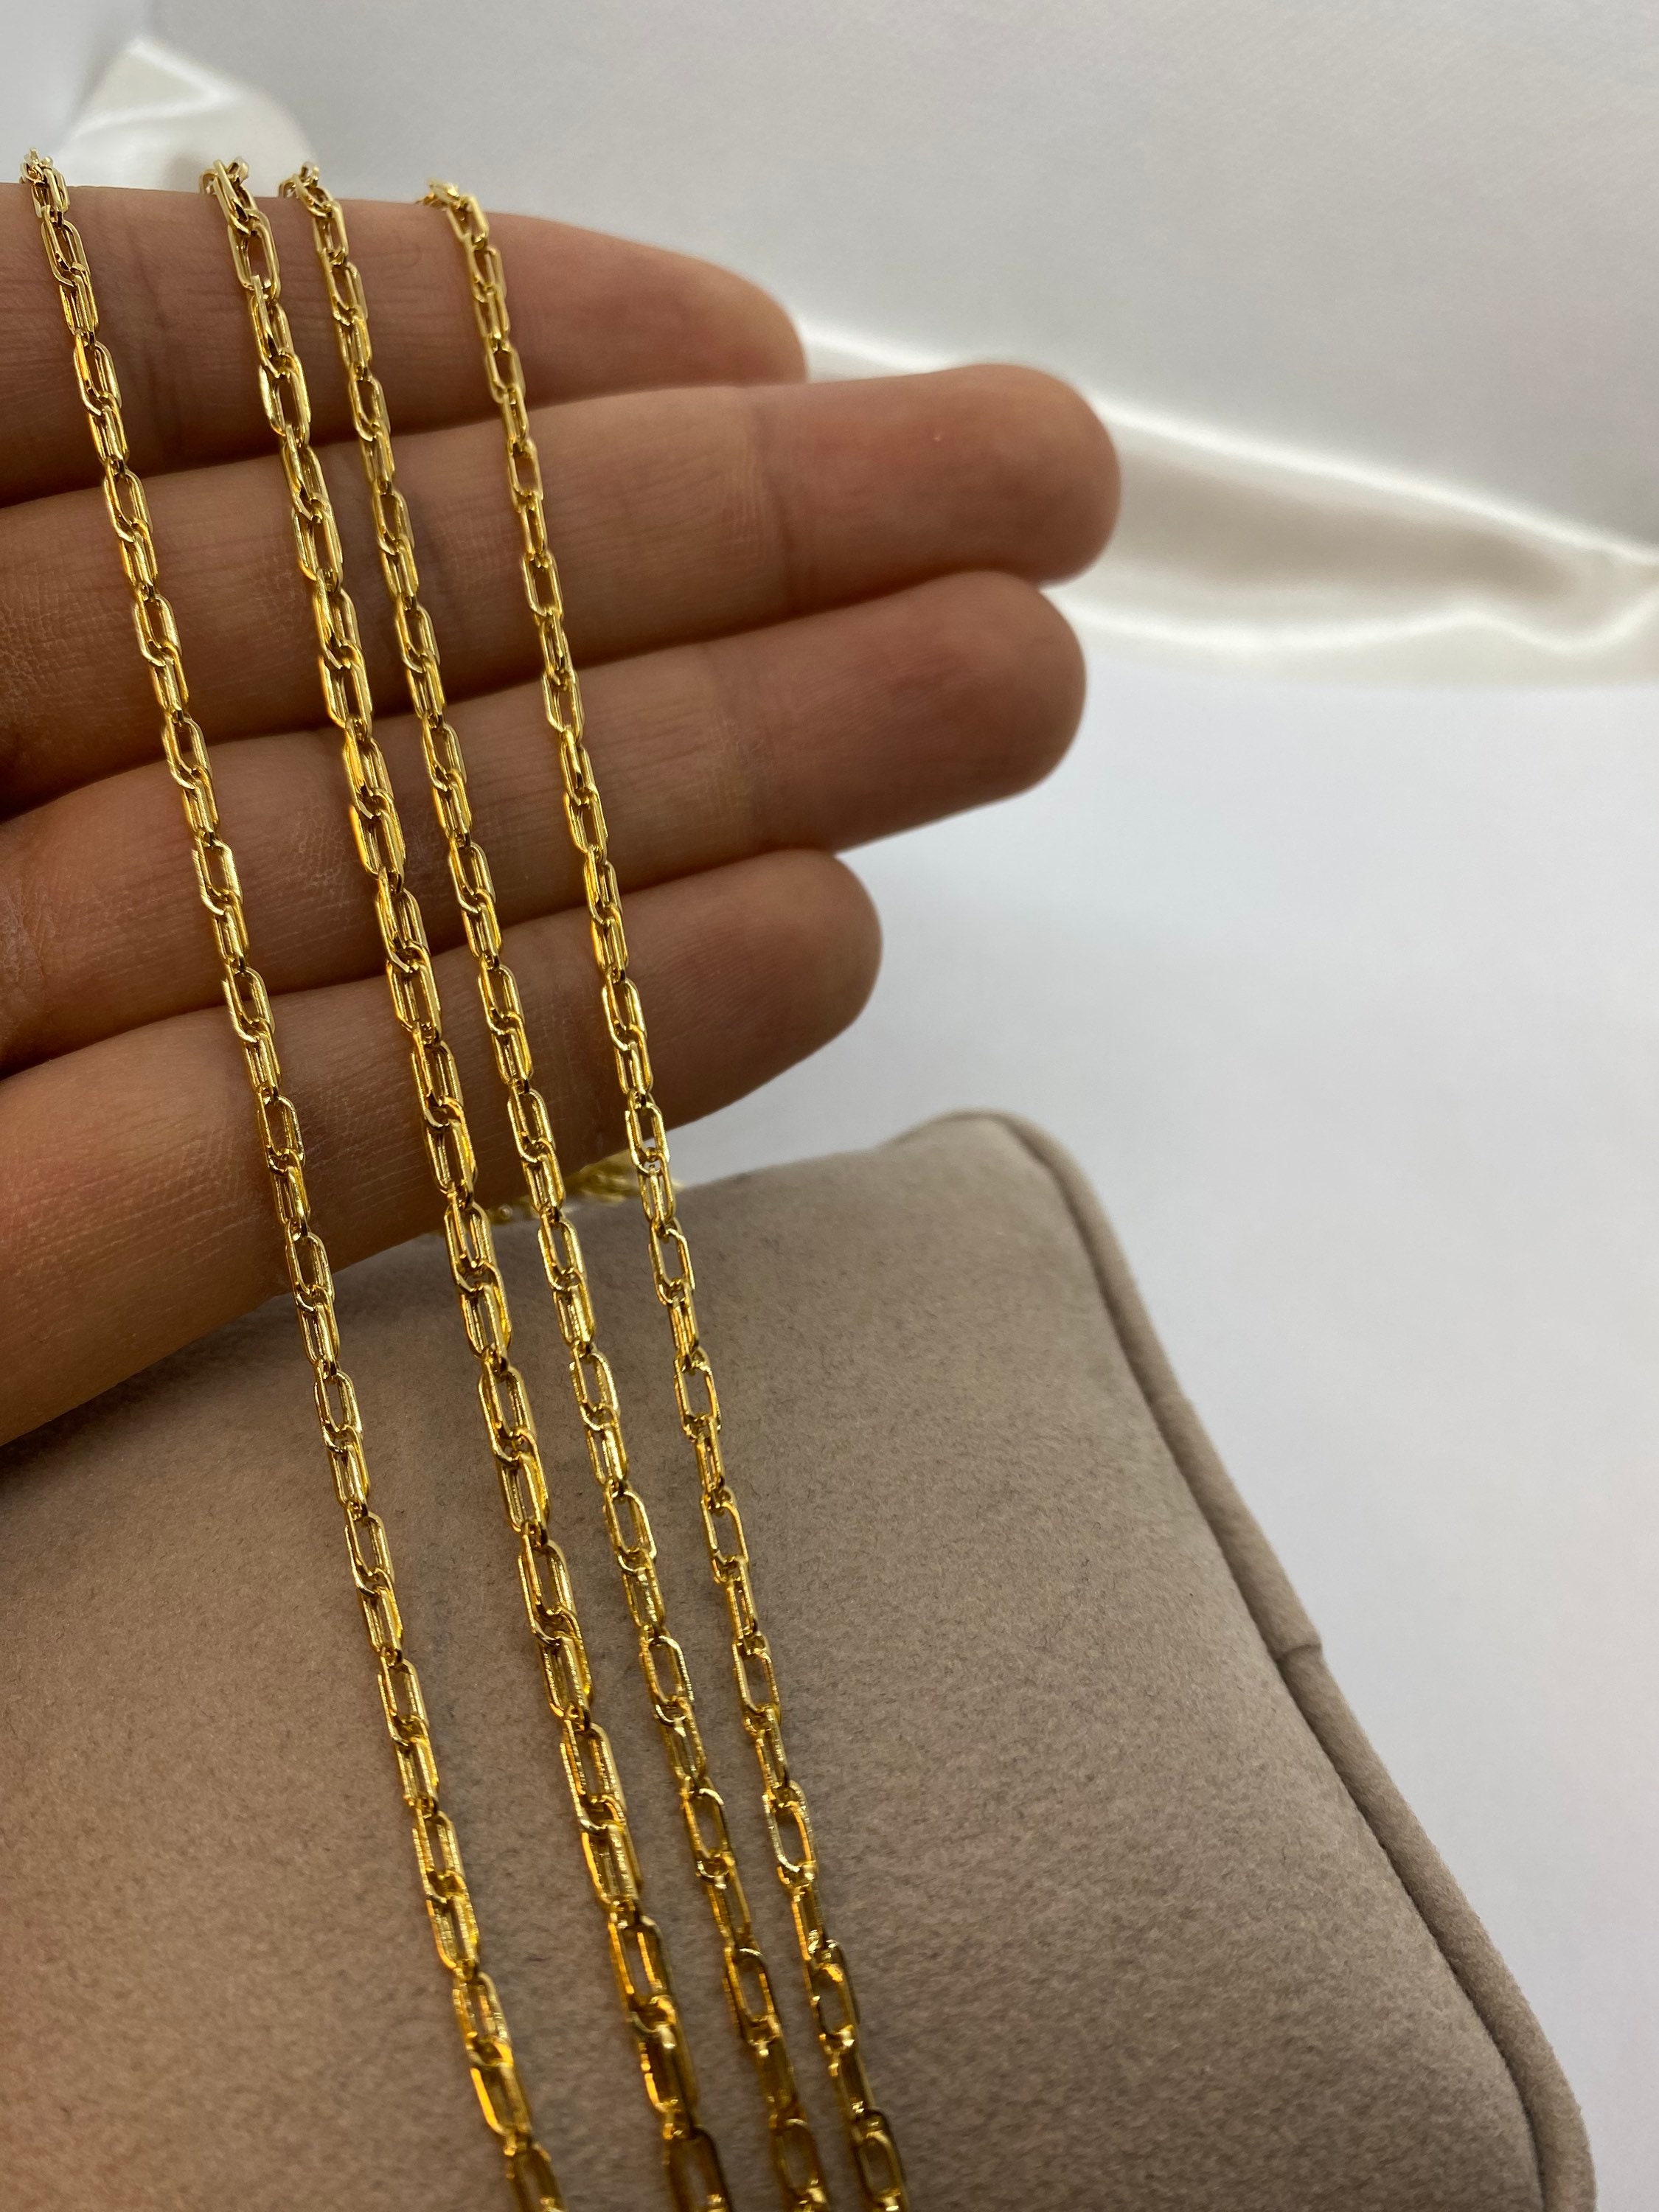 14k Solid Gold Rope Chain Bracelet 2.5mm, Florence Collection